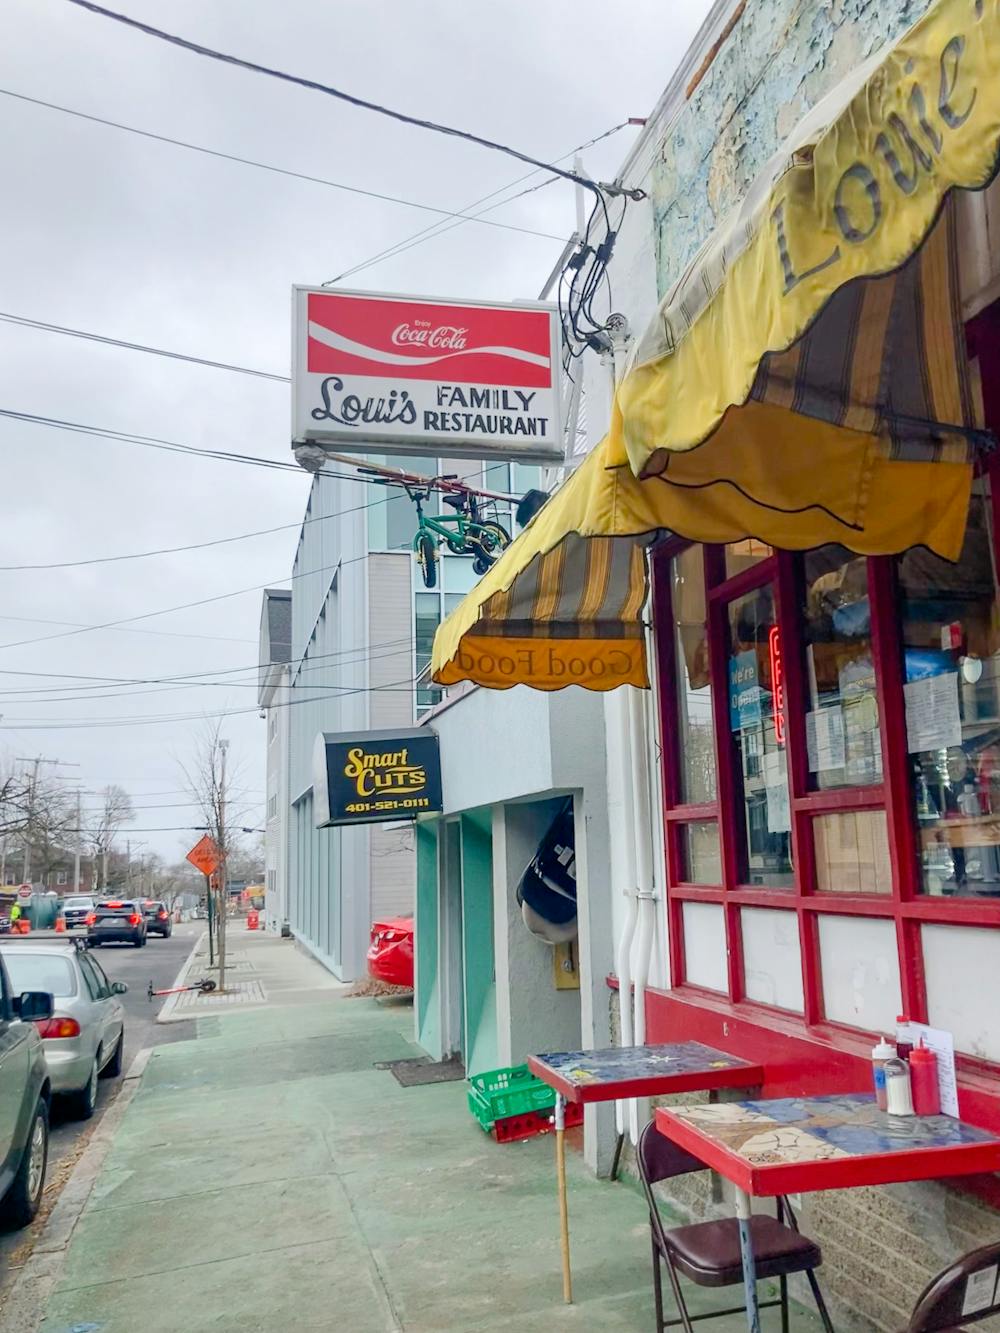 Gianfrinesco is not only co-owner of Louis Family restaurant, but also the founder’s son and the namesake of the restaurant’s “drunk Johnny omelet.”

